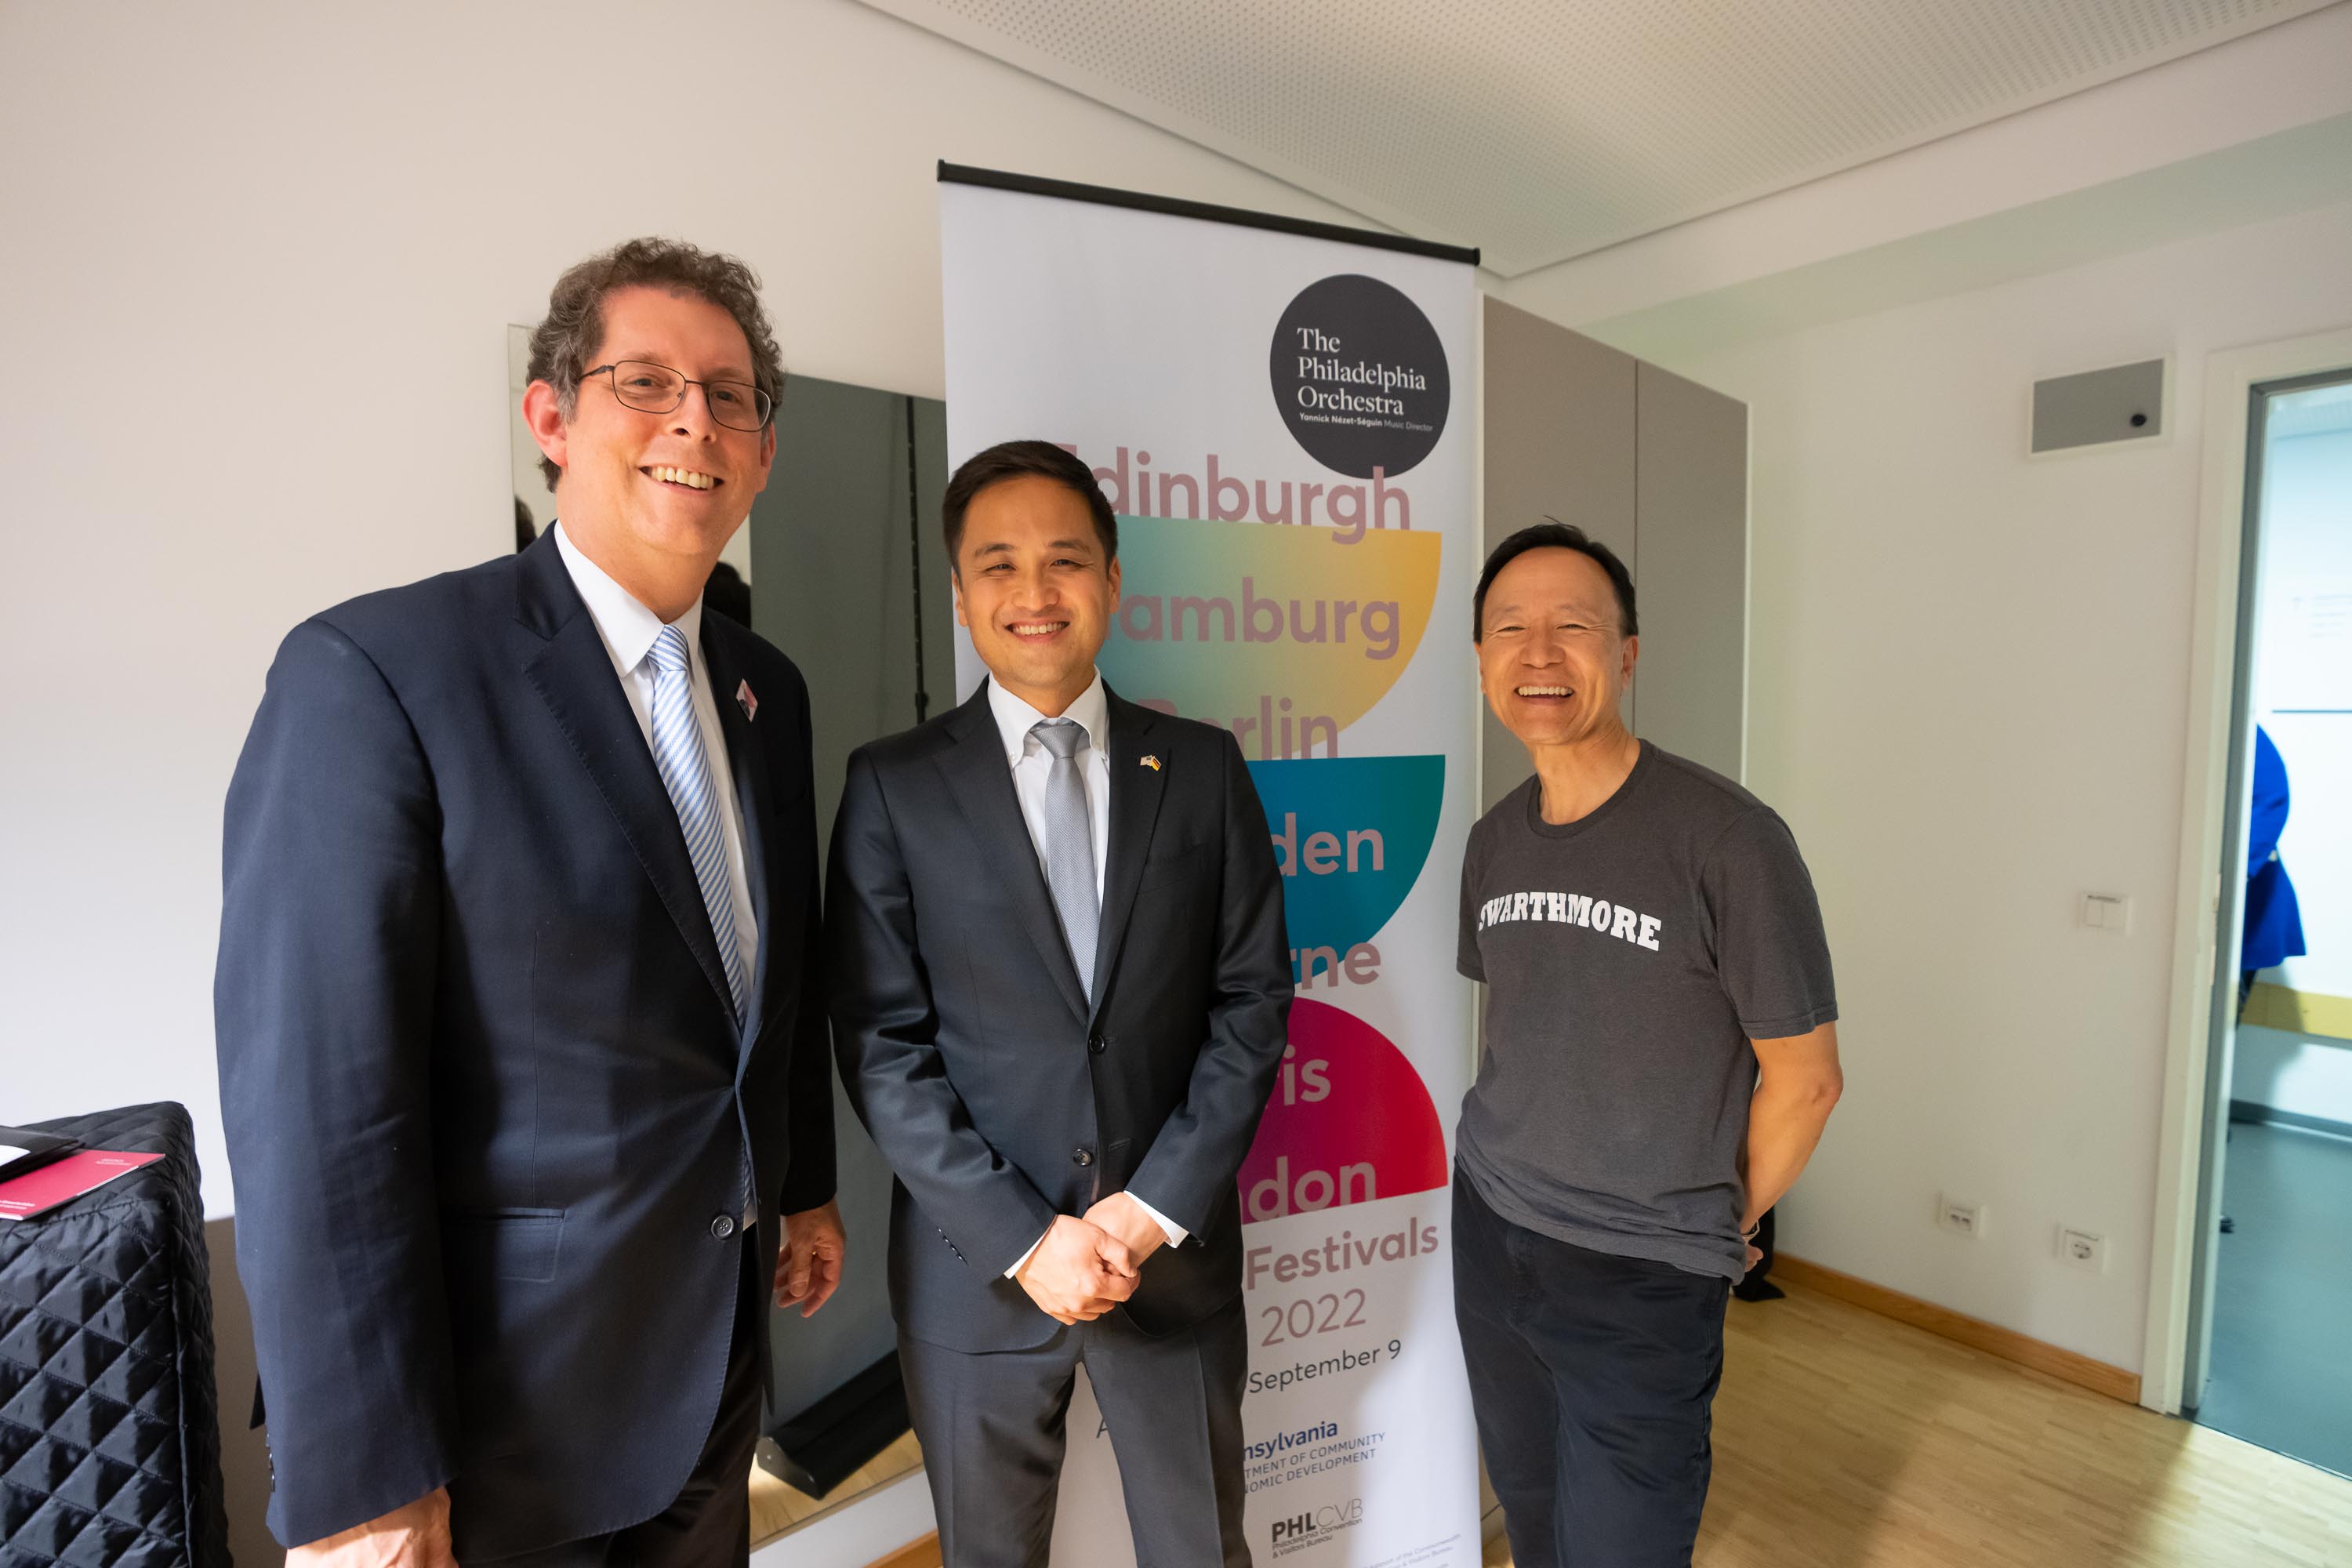 Philadelphia Orchestra and Kimmel Center, Inc., Executive Vice President Ryan Fleur (left) and Concertmaster David Kim (right) meet backstage with Consul General in Leipzig Ken Toko